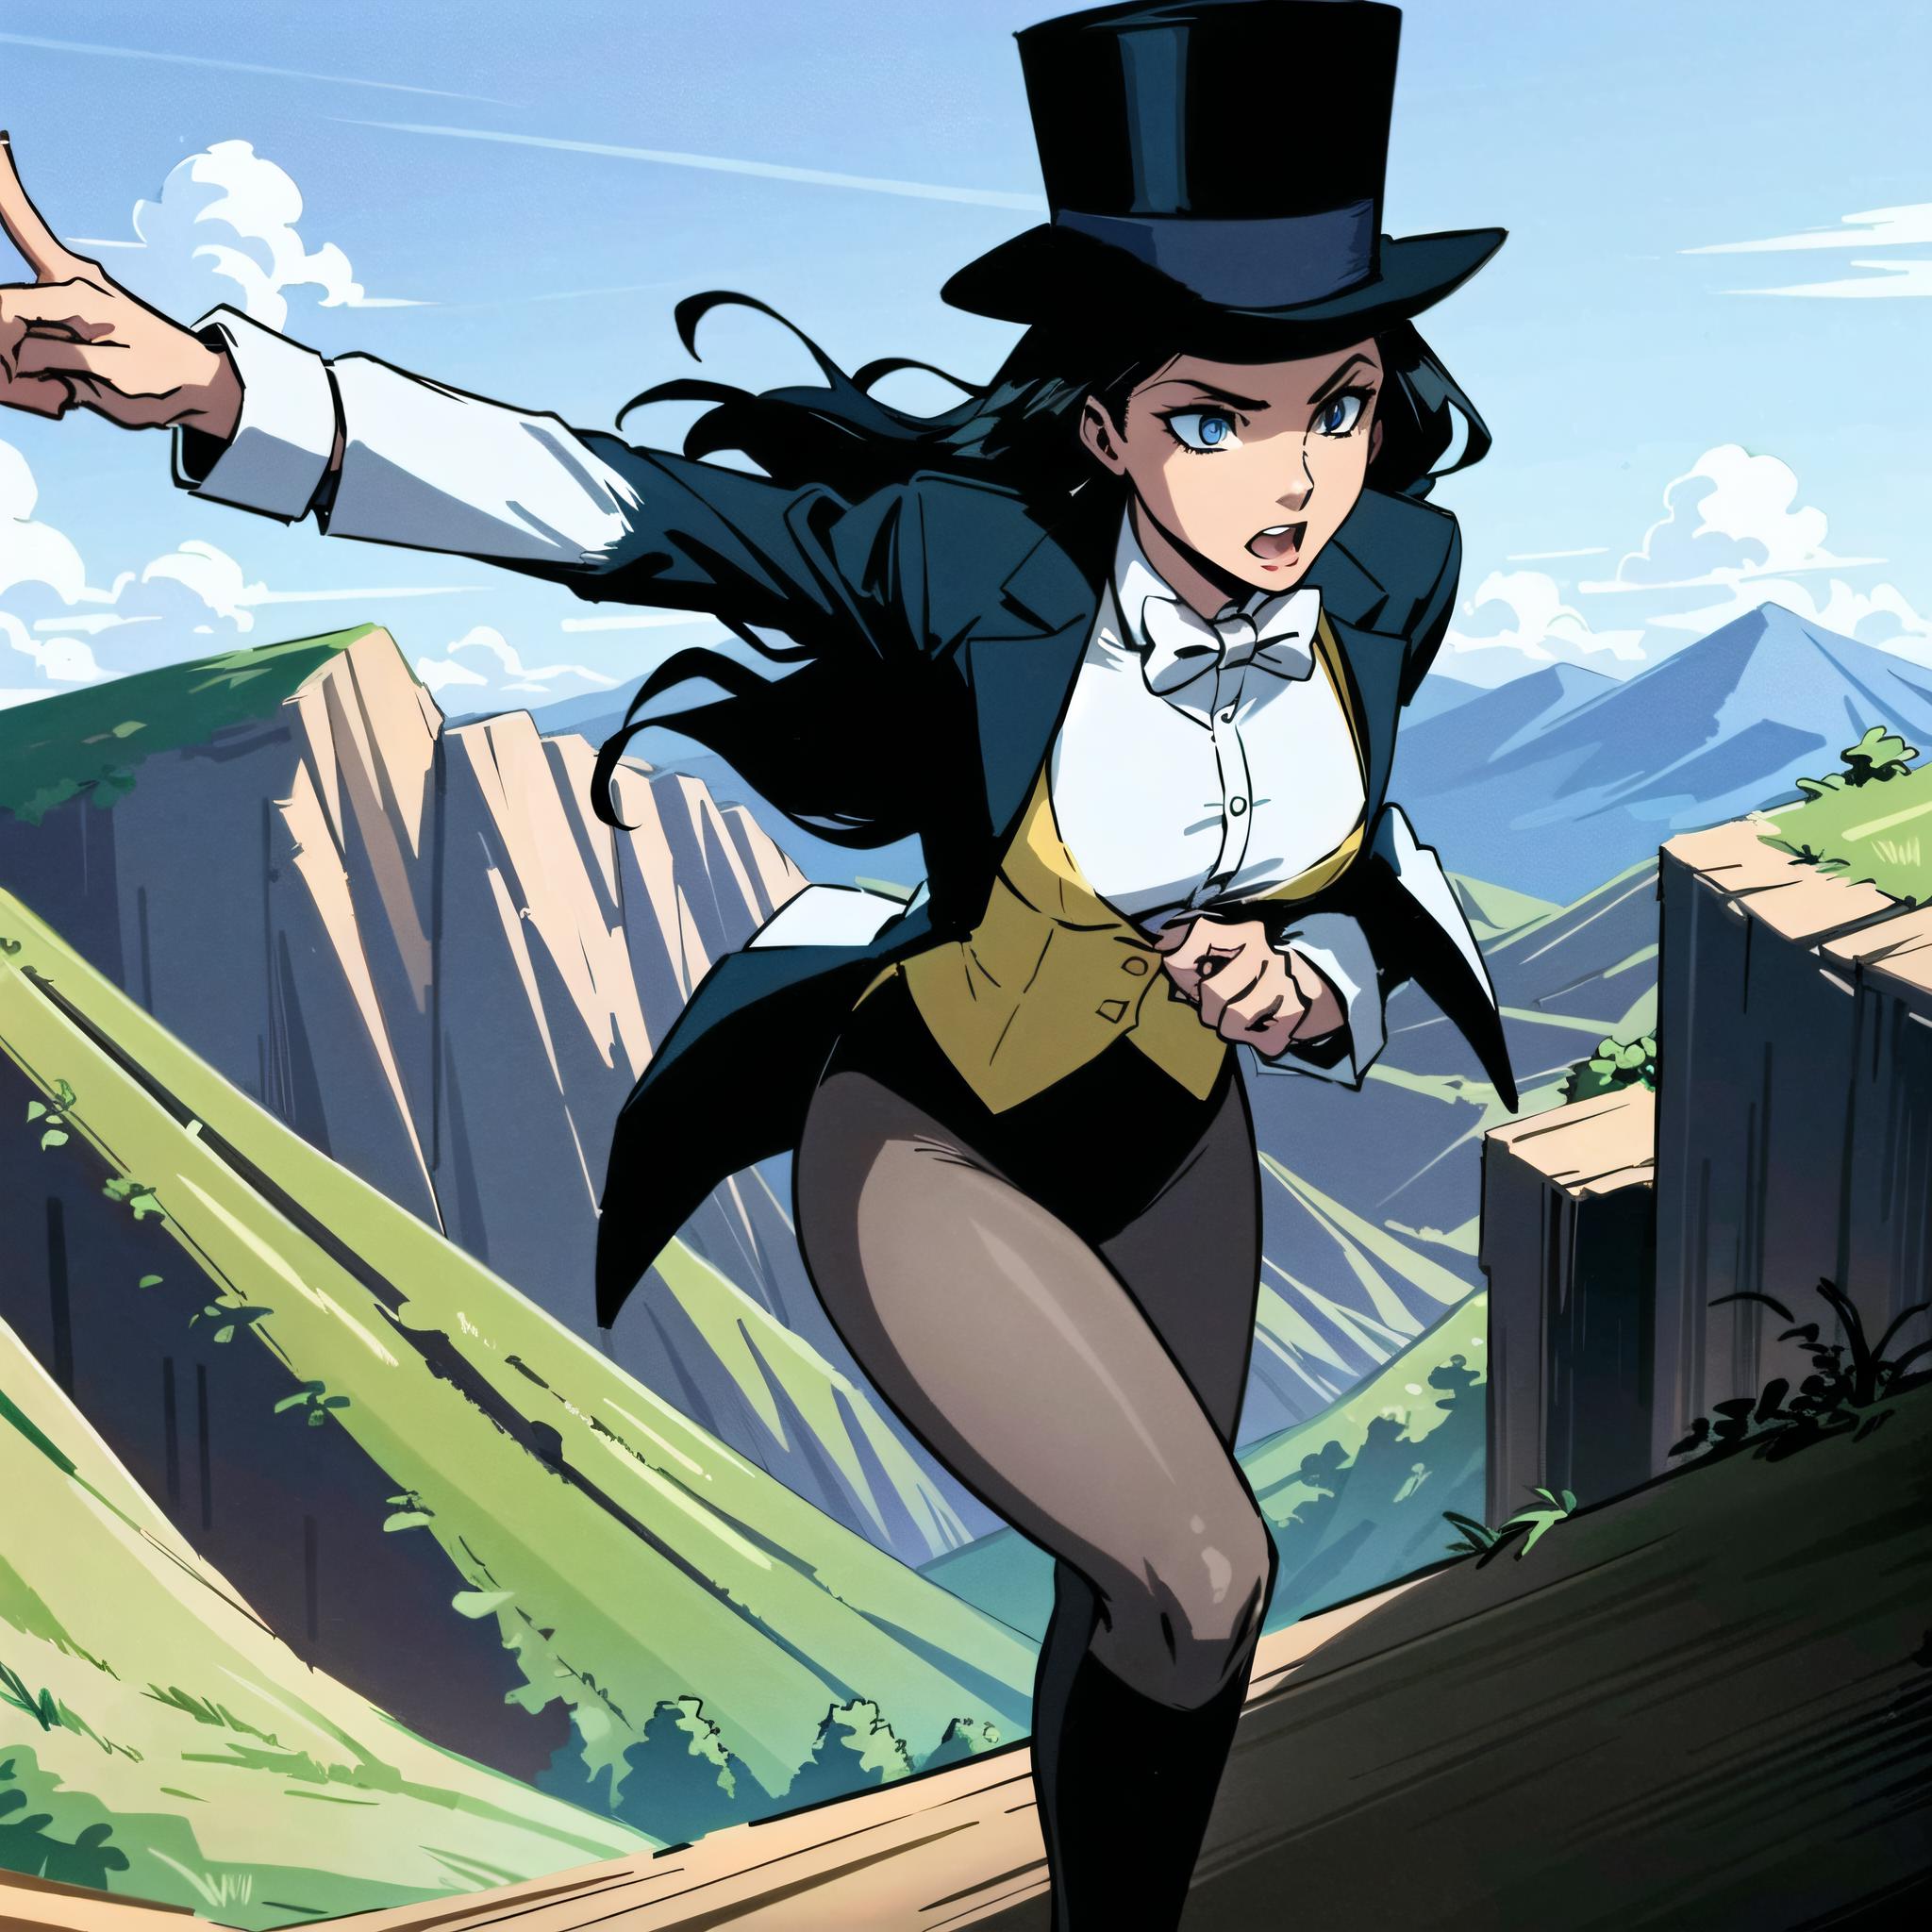 Zatanna (Young Justice) LoRA image by novelProphet